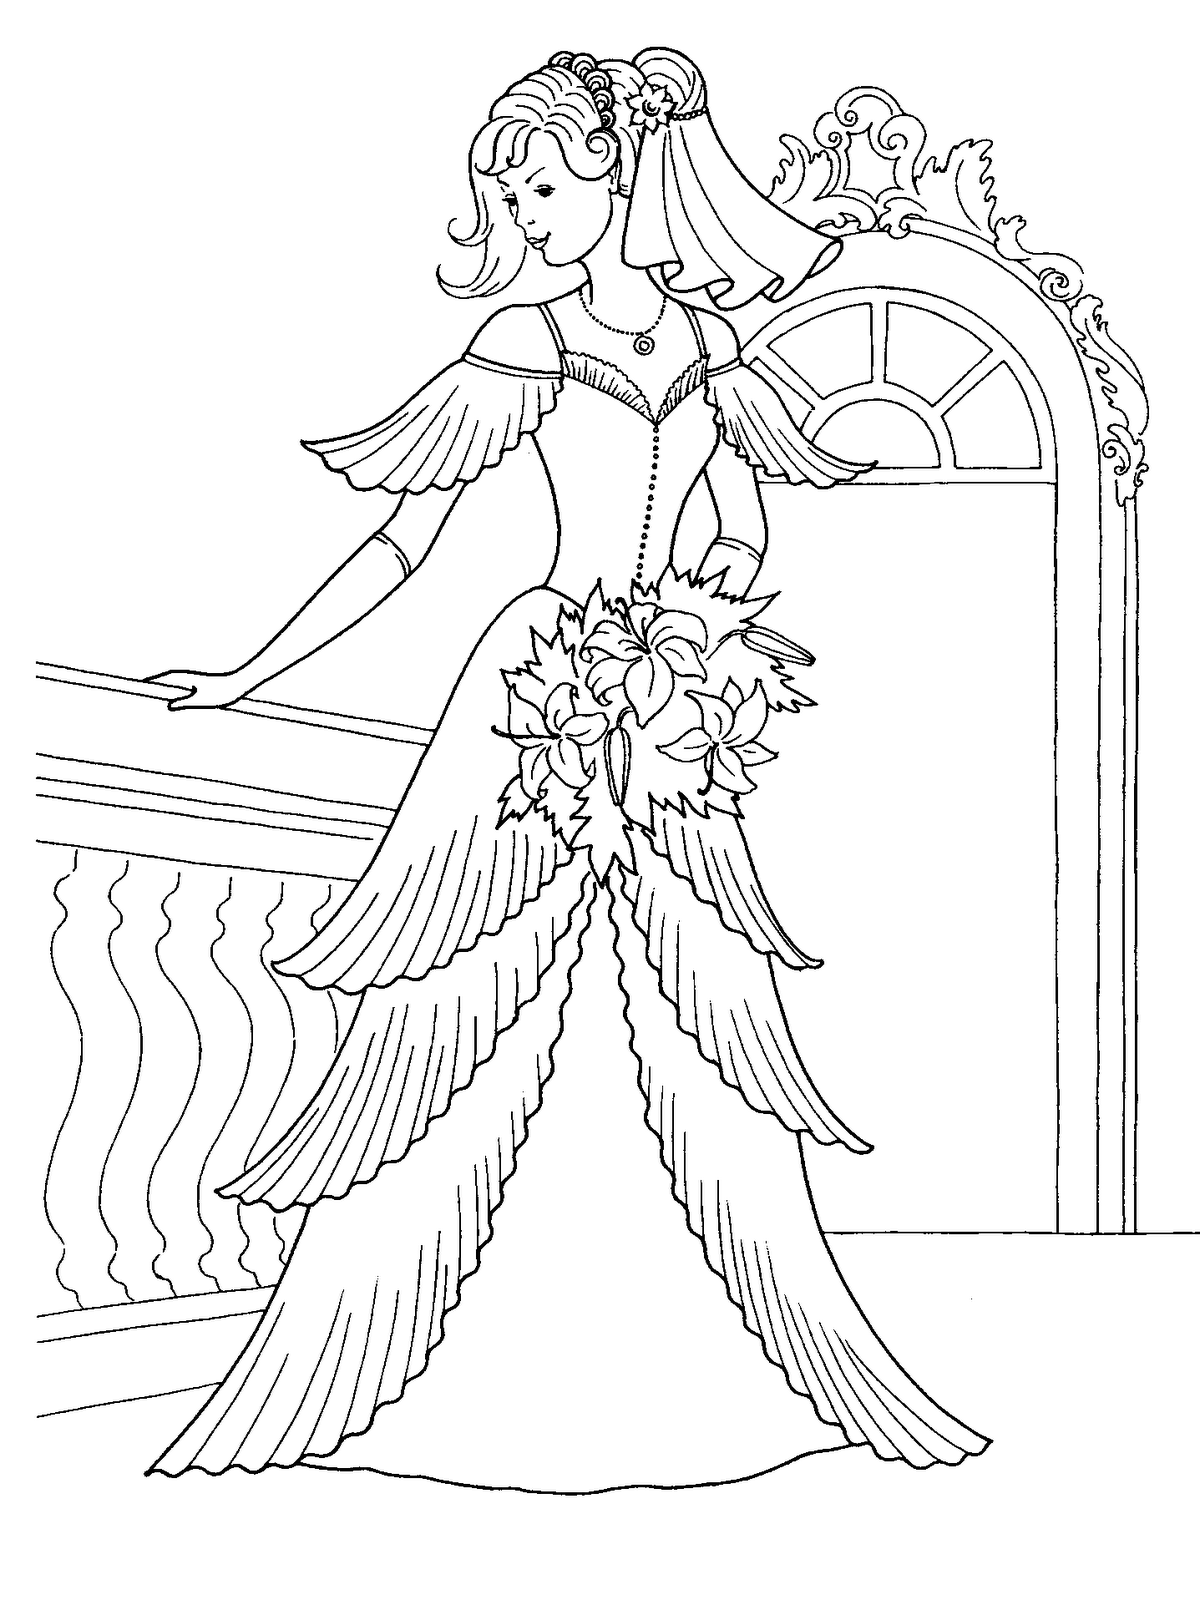 Download The Wedding Dresses Princess Coloring Sheet to Print | Colorful Cartoon Coloring Pages